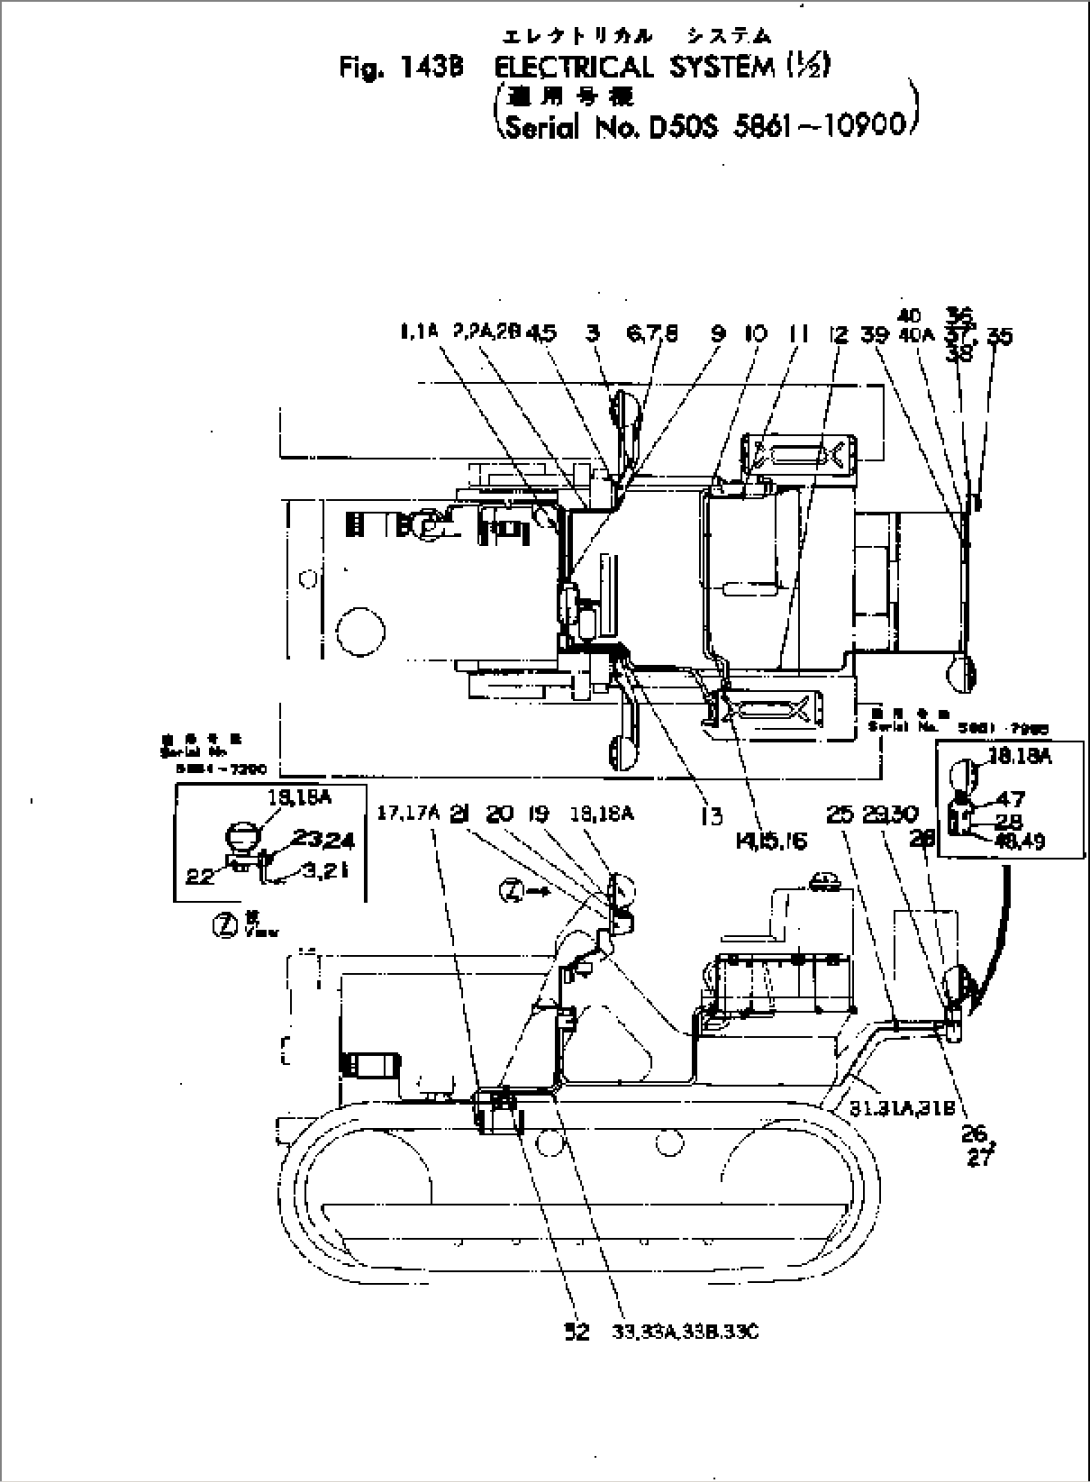 ELECTRICAL SYSTEM (1/2)(#5861-10900)